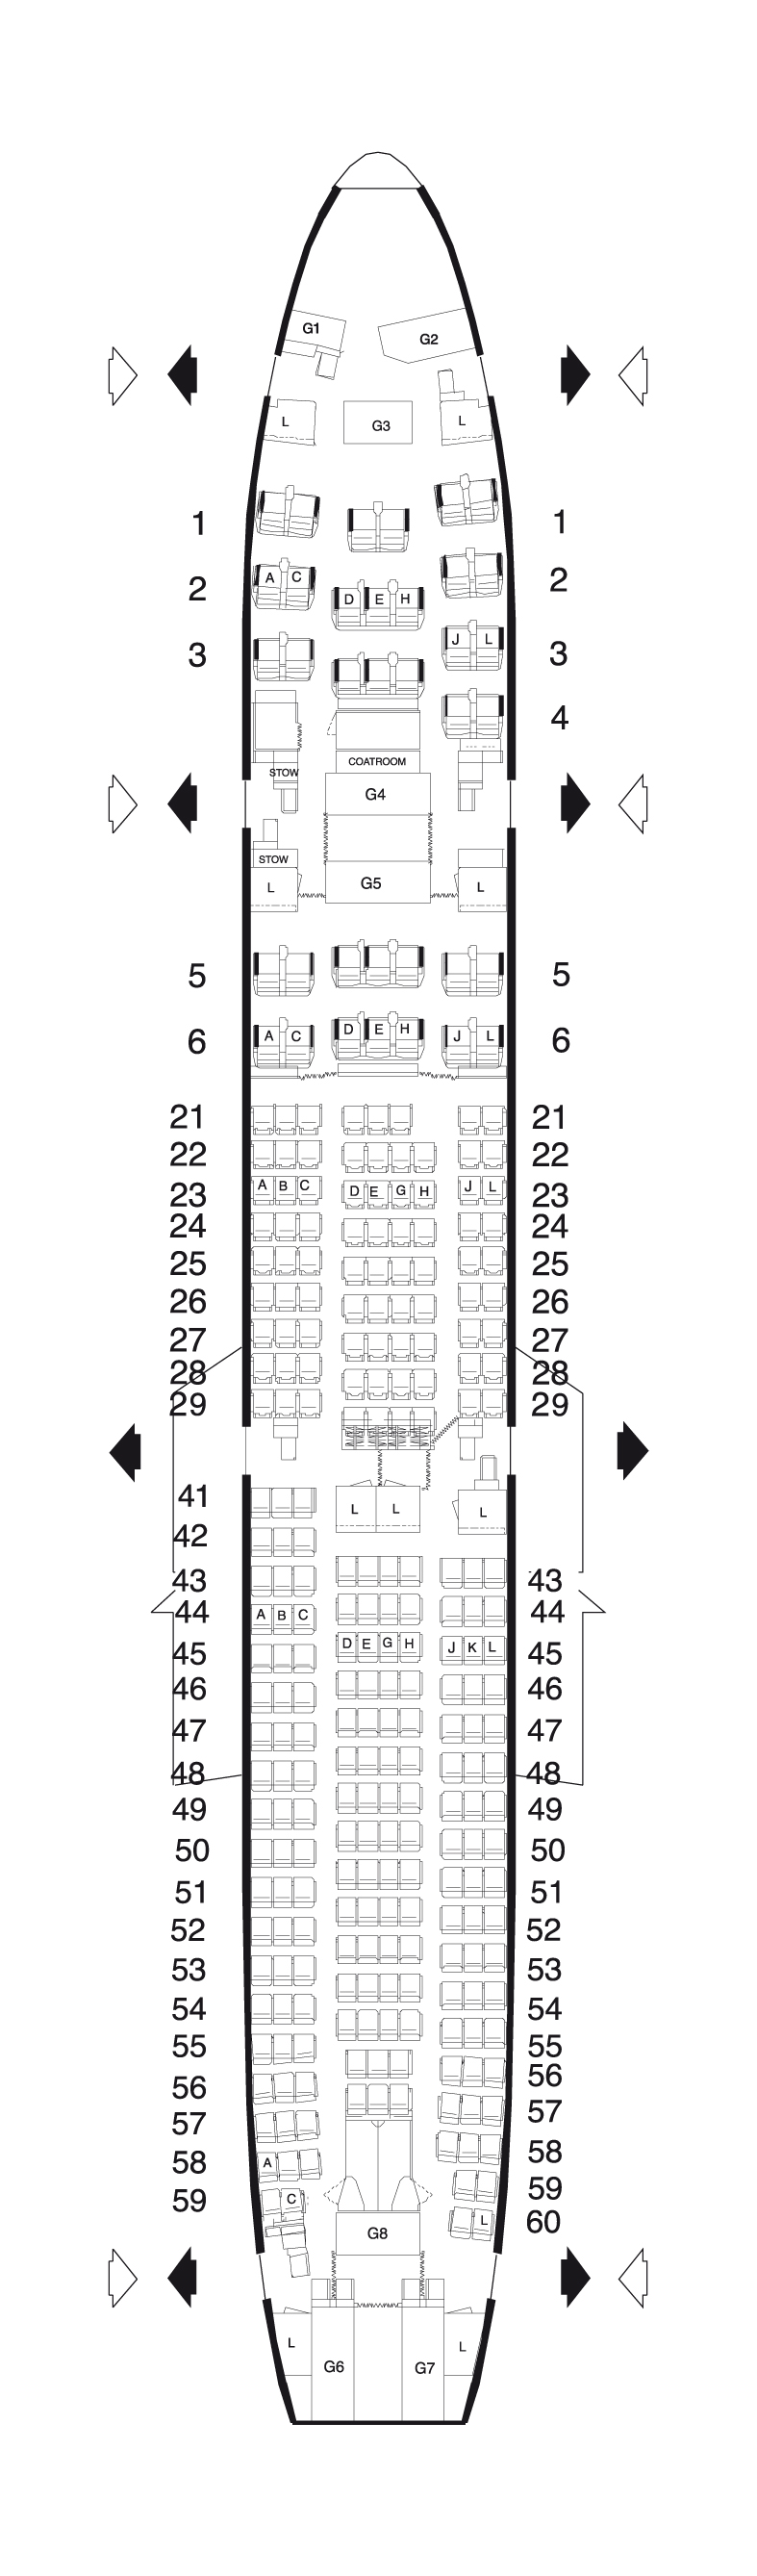 Airbus A320 Jet Seating Chart